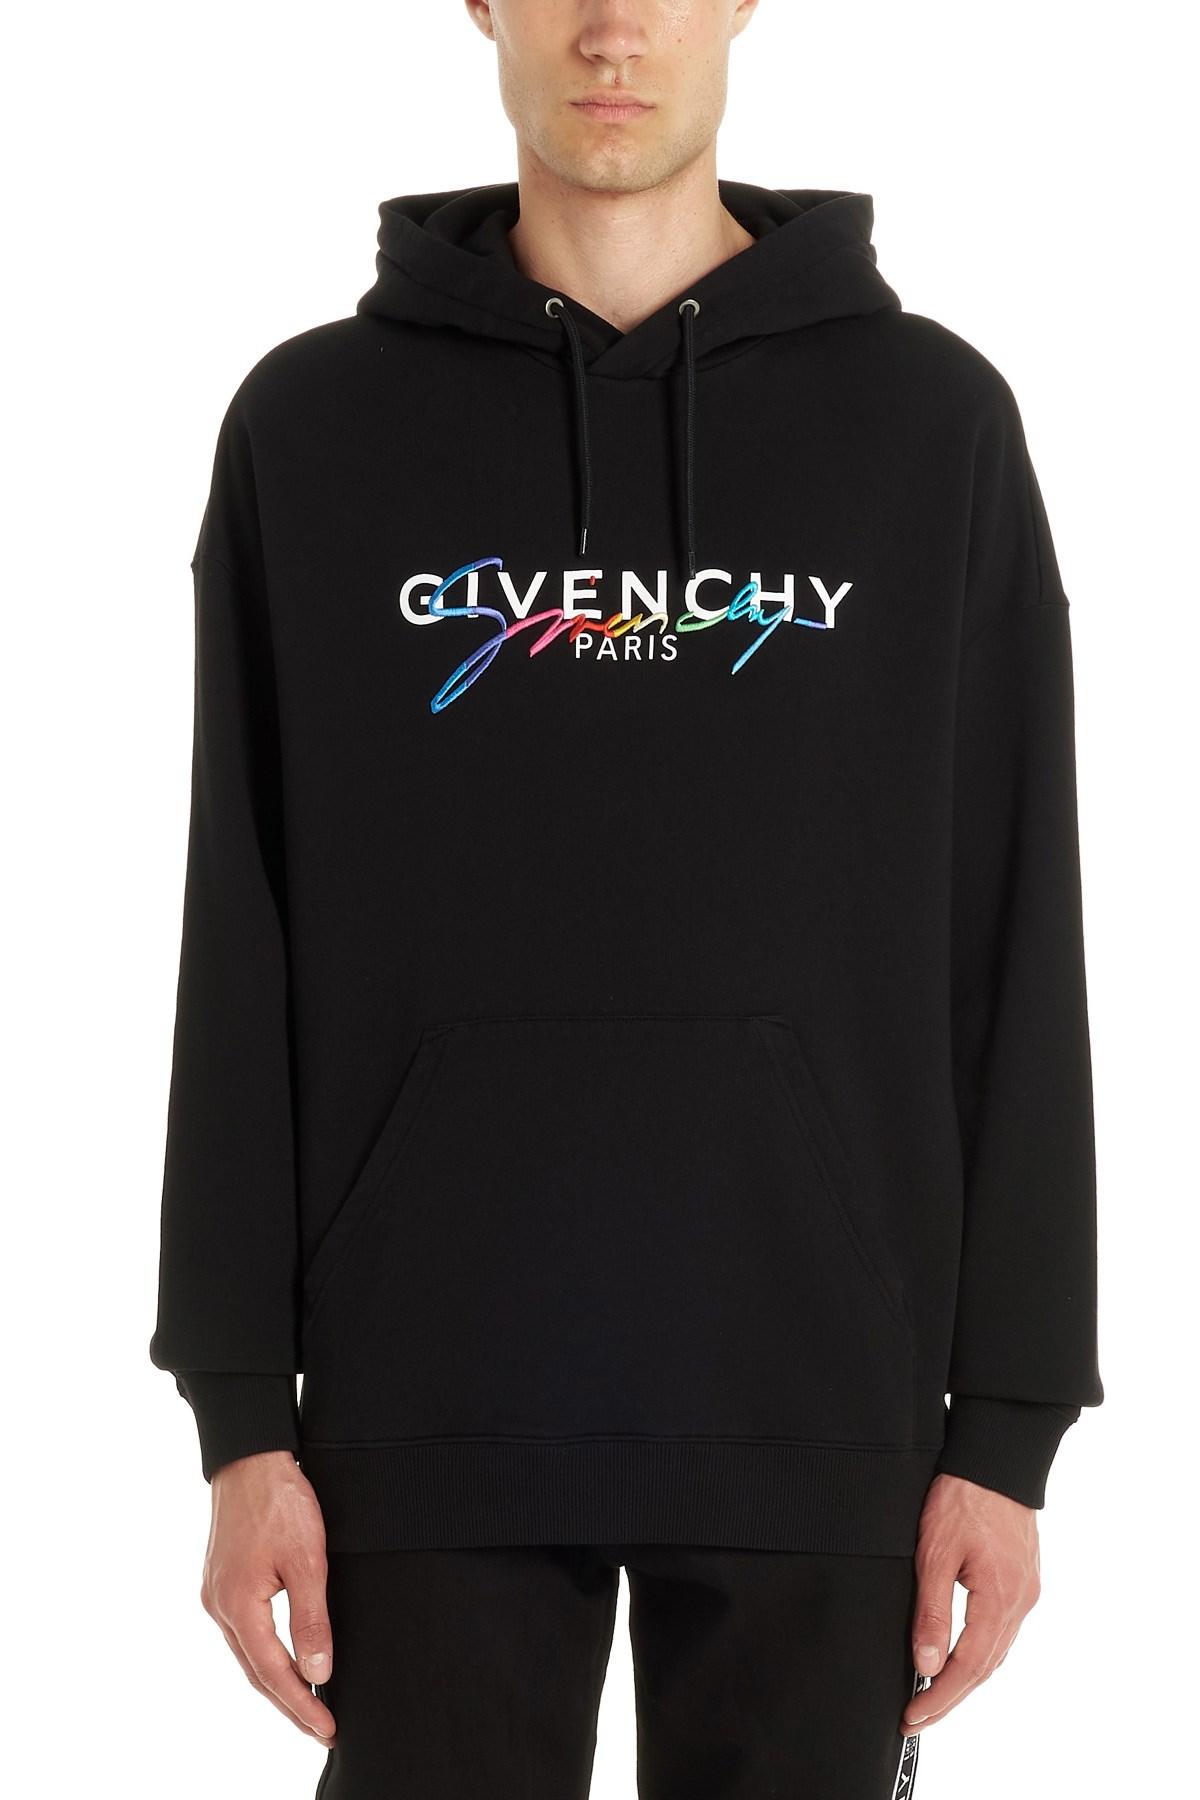 Givenchy Cotton 'rainbow' Hoodie in Black for Men - Lyst